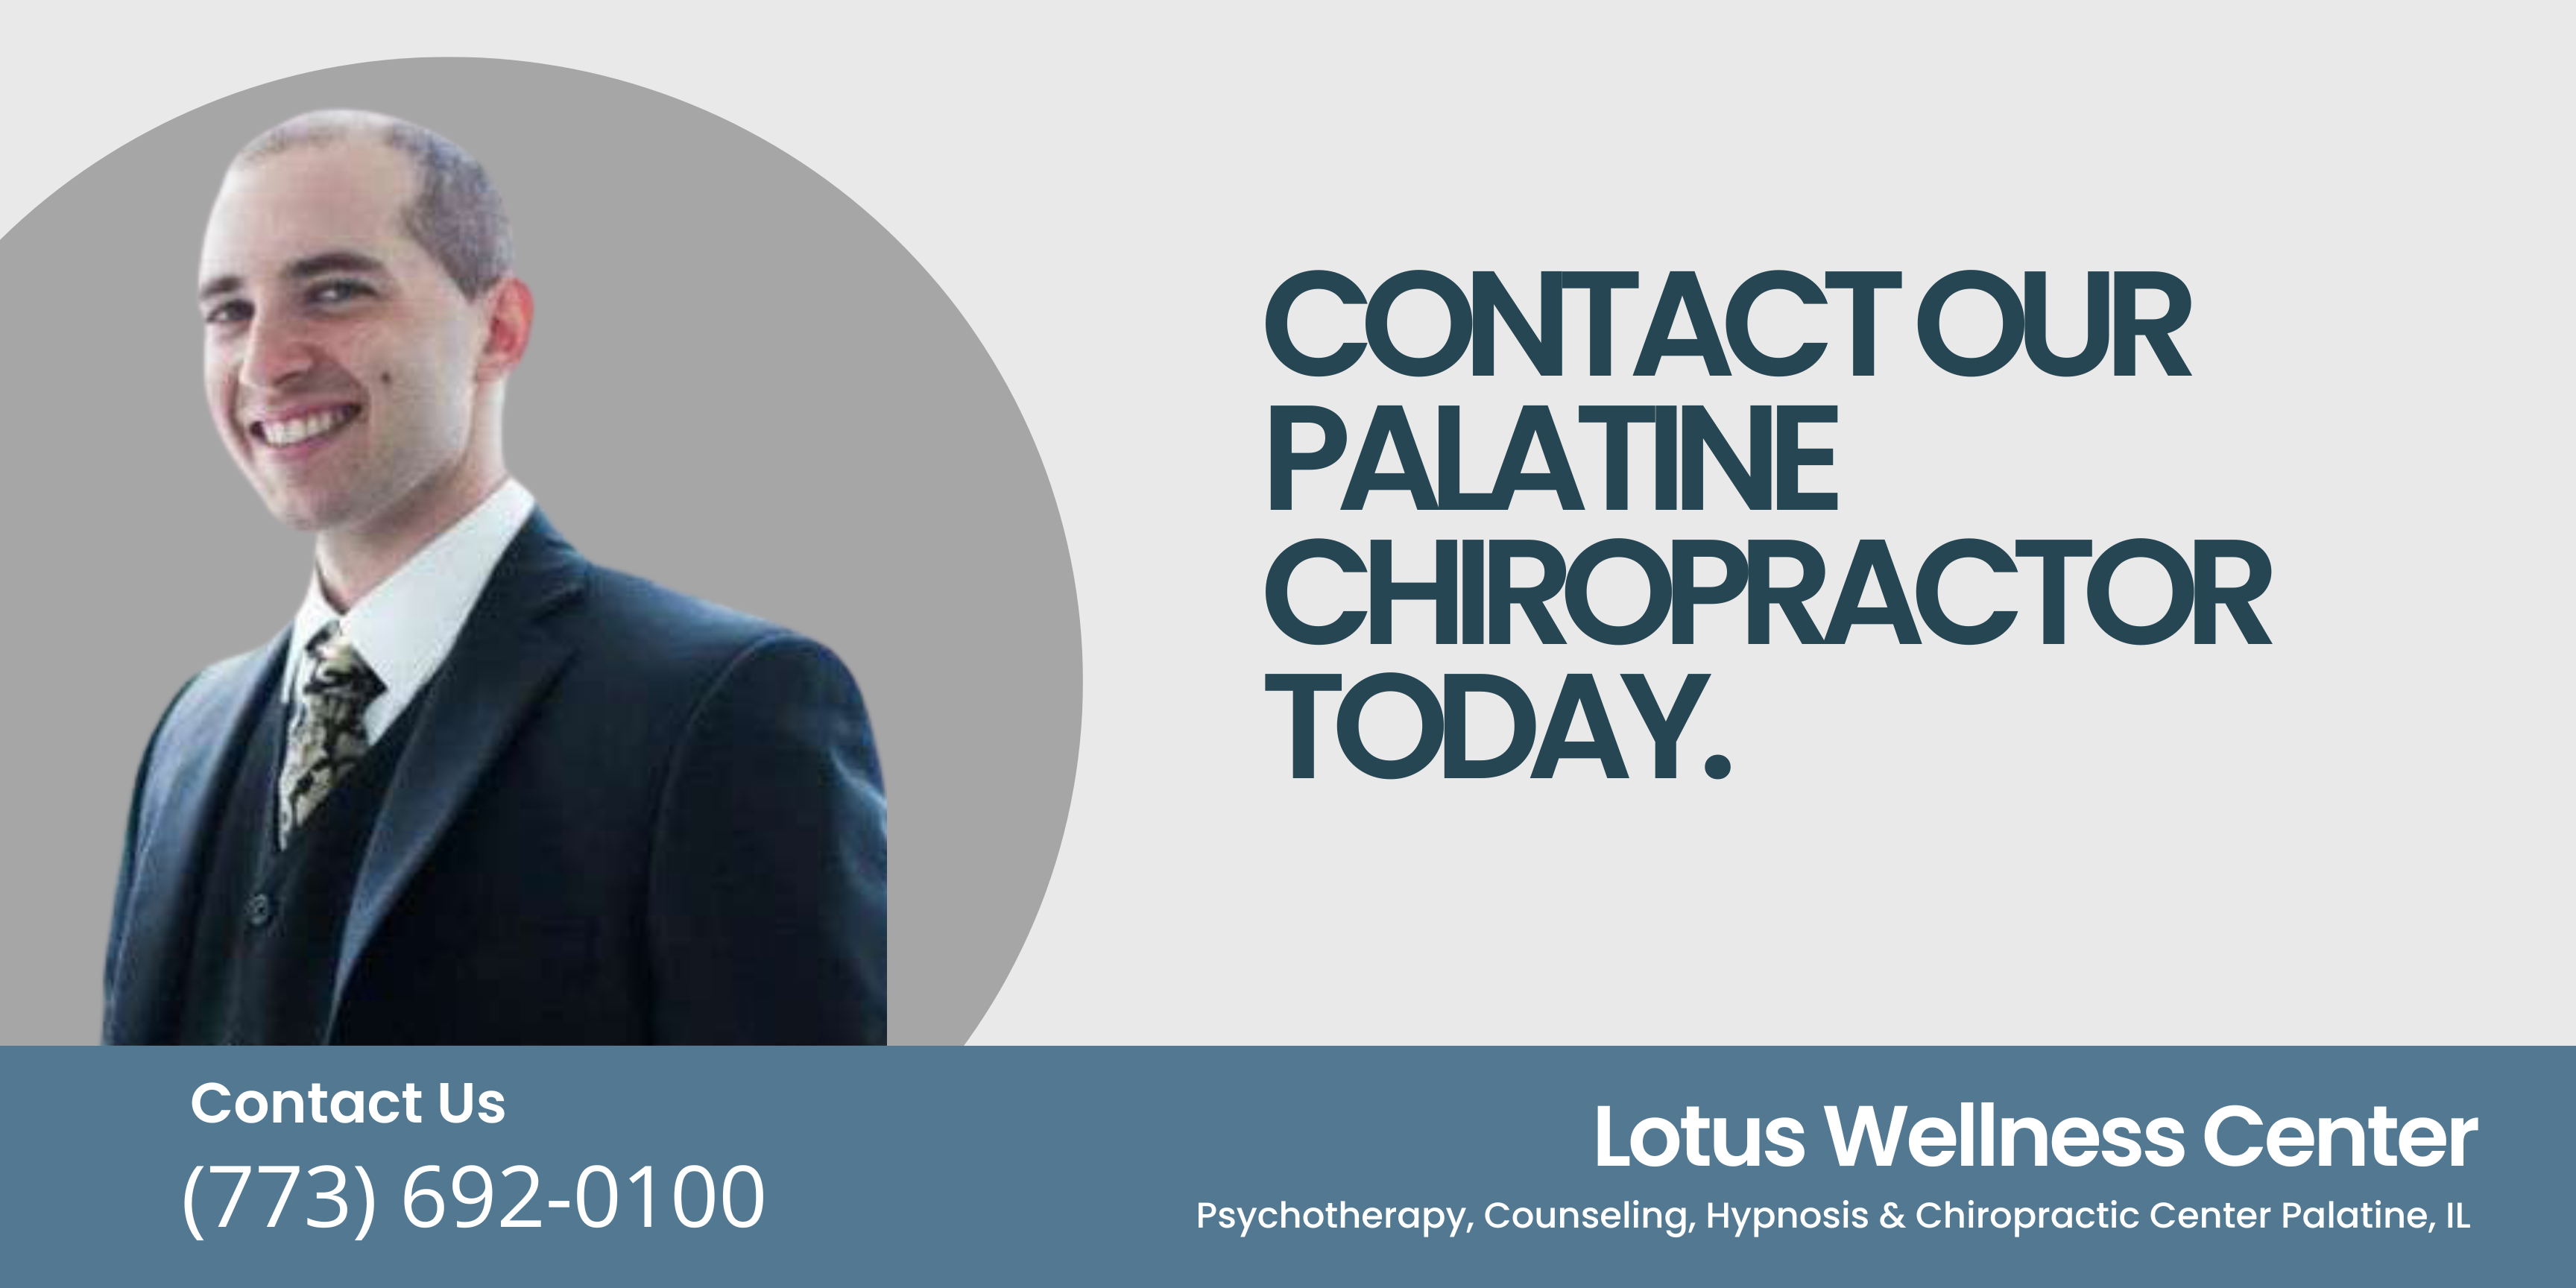 contact our Palatine Chiropractor